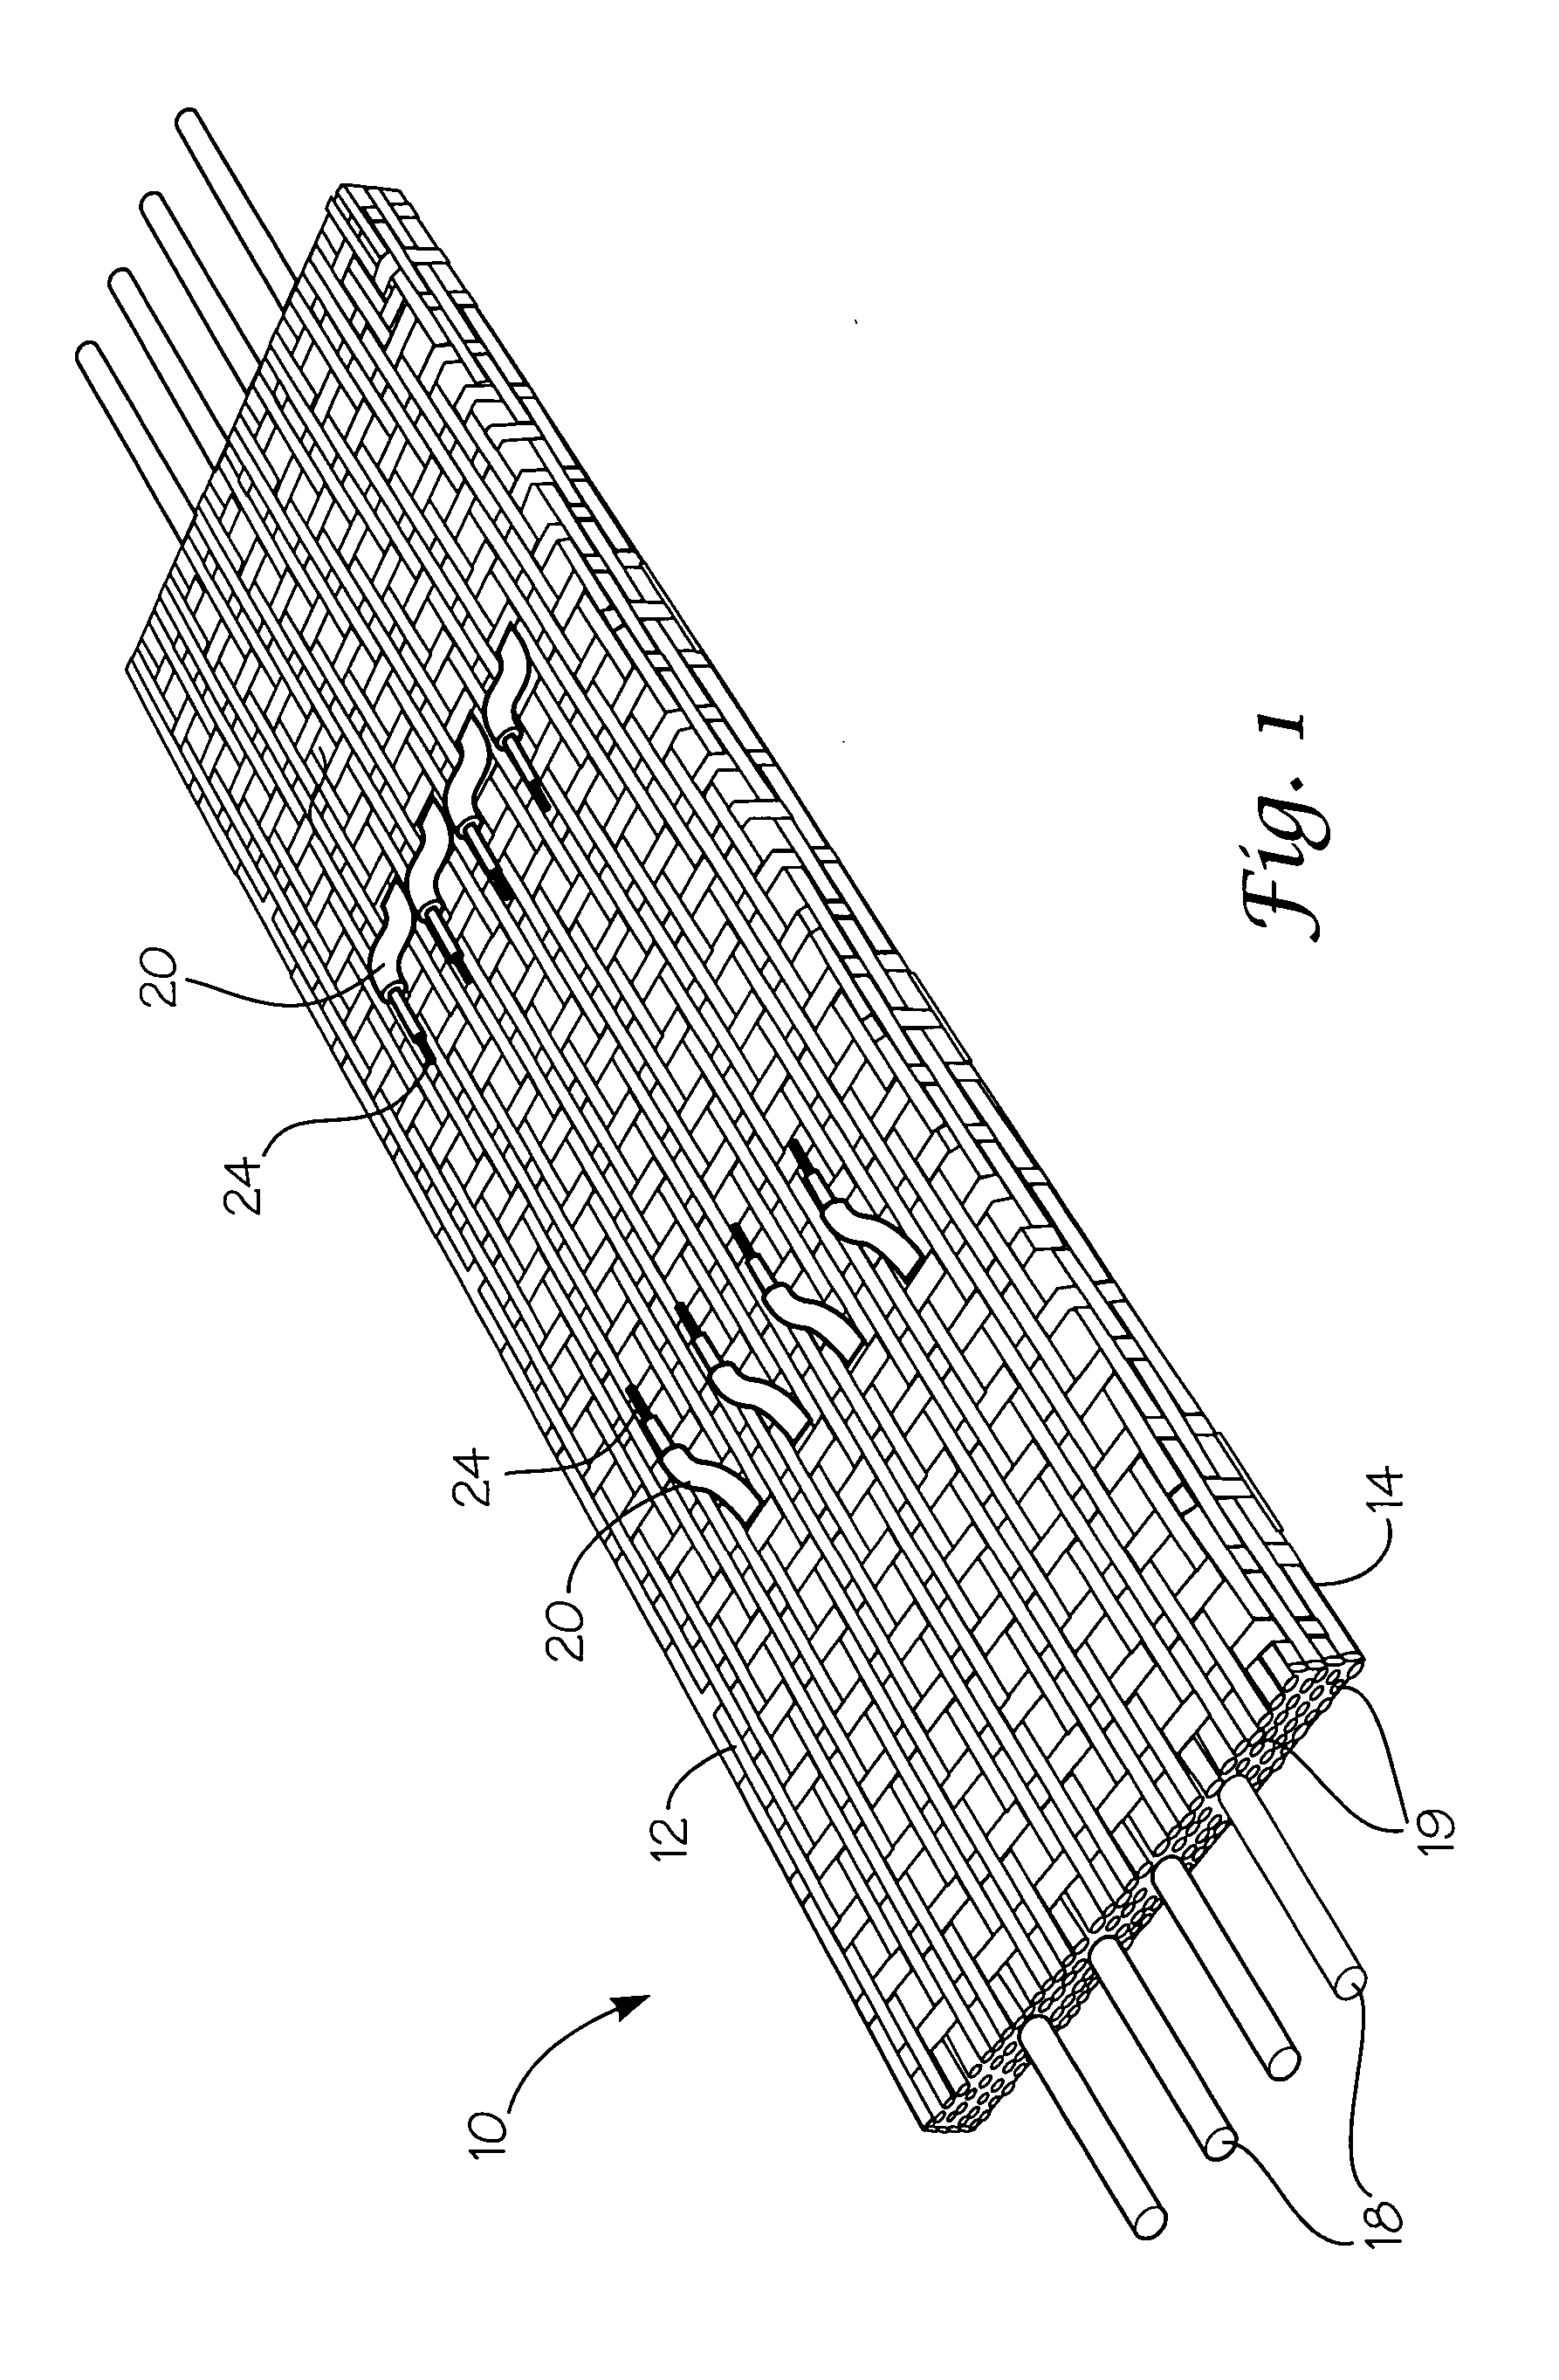 Elastic fabric with sinusoidally disposed wires